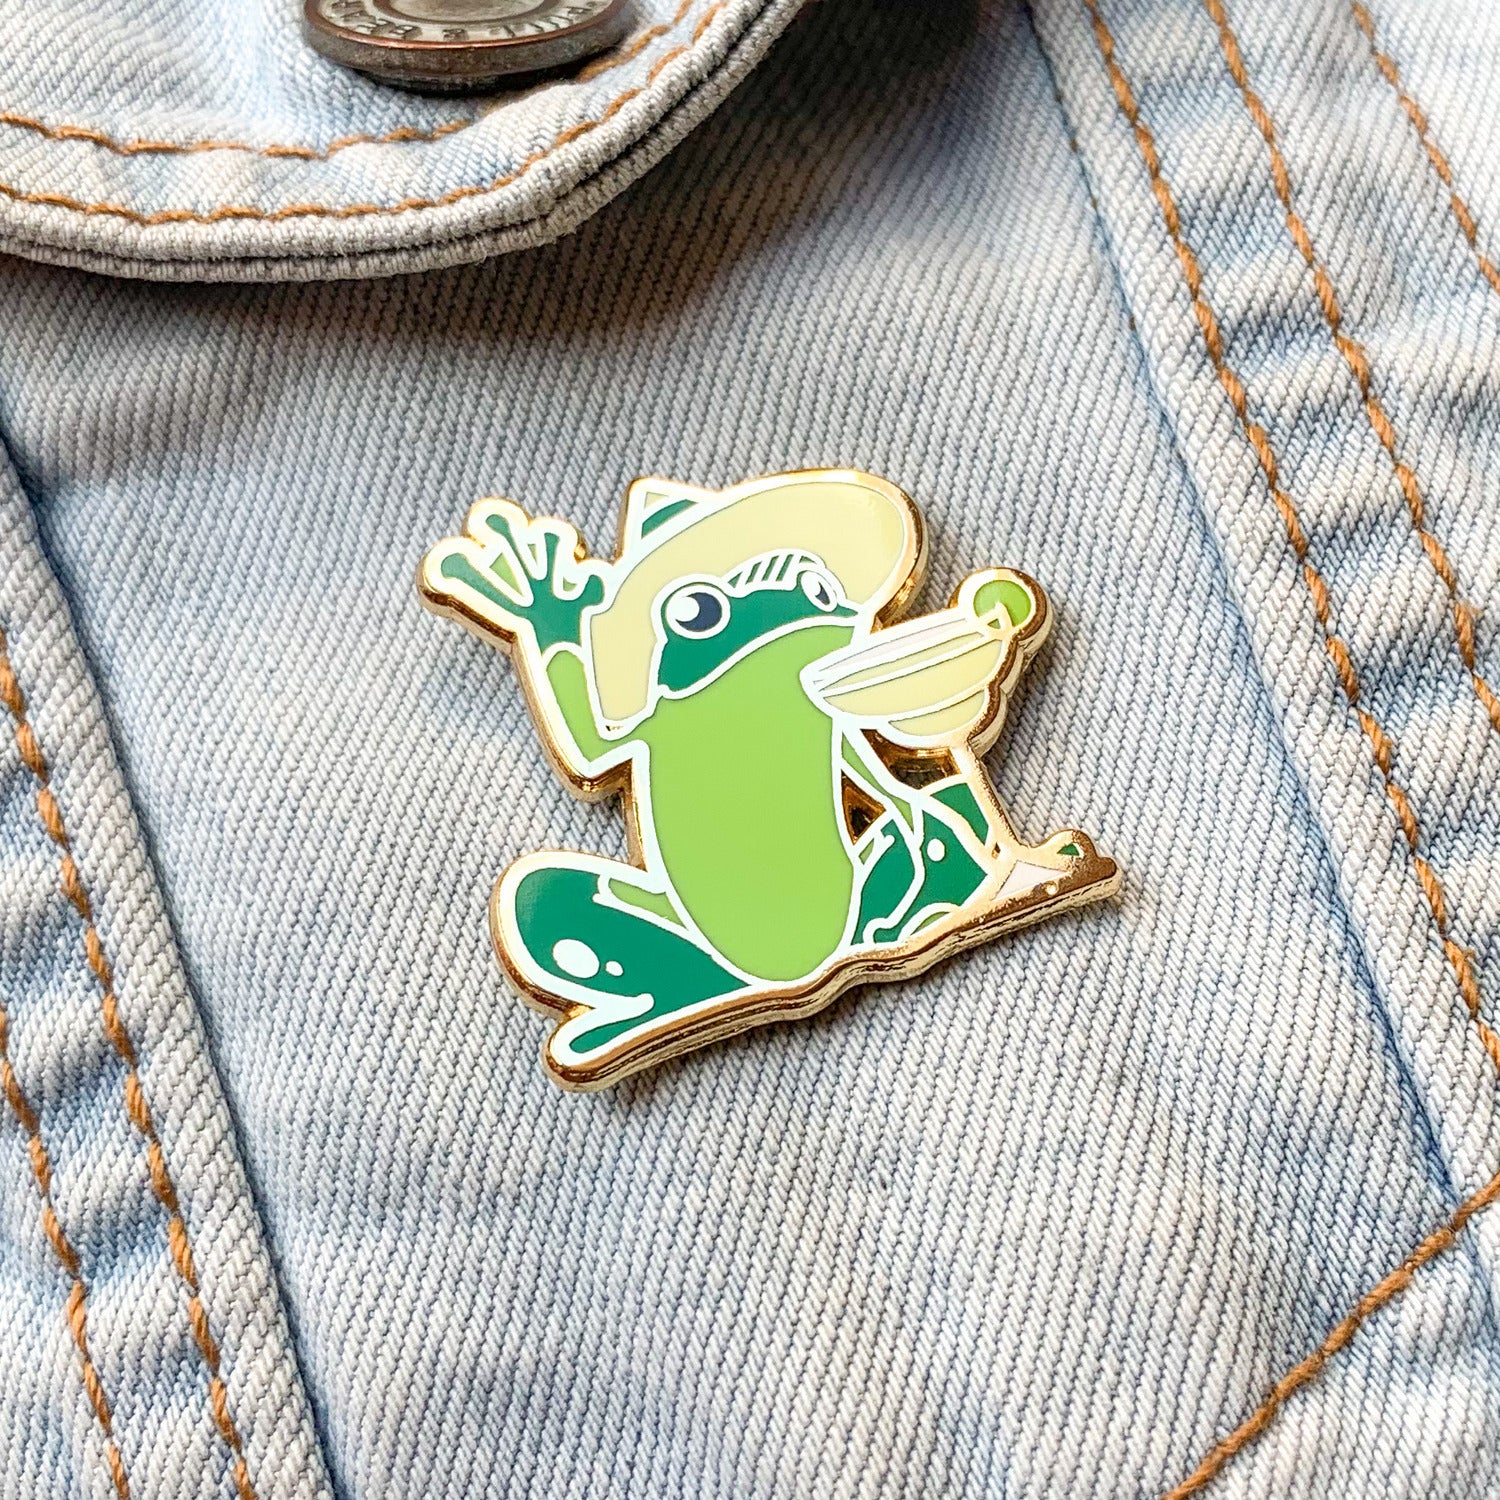 Frog and Margarita Cocktail Hard Enamel Pin by Cocktail Critters on Denim